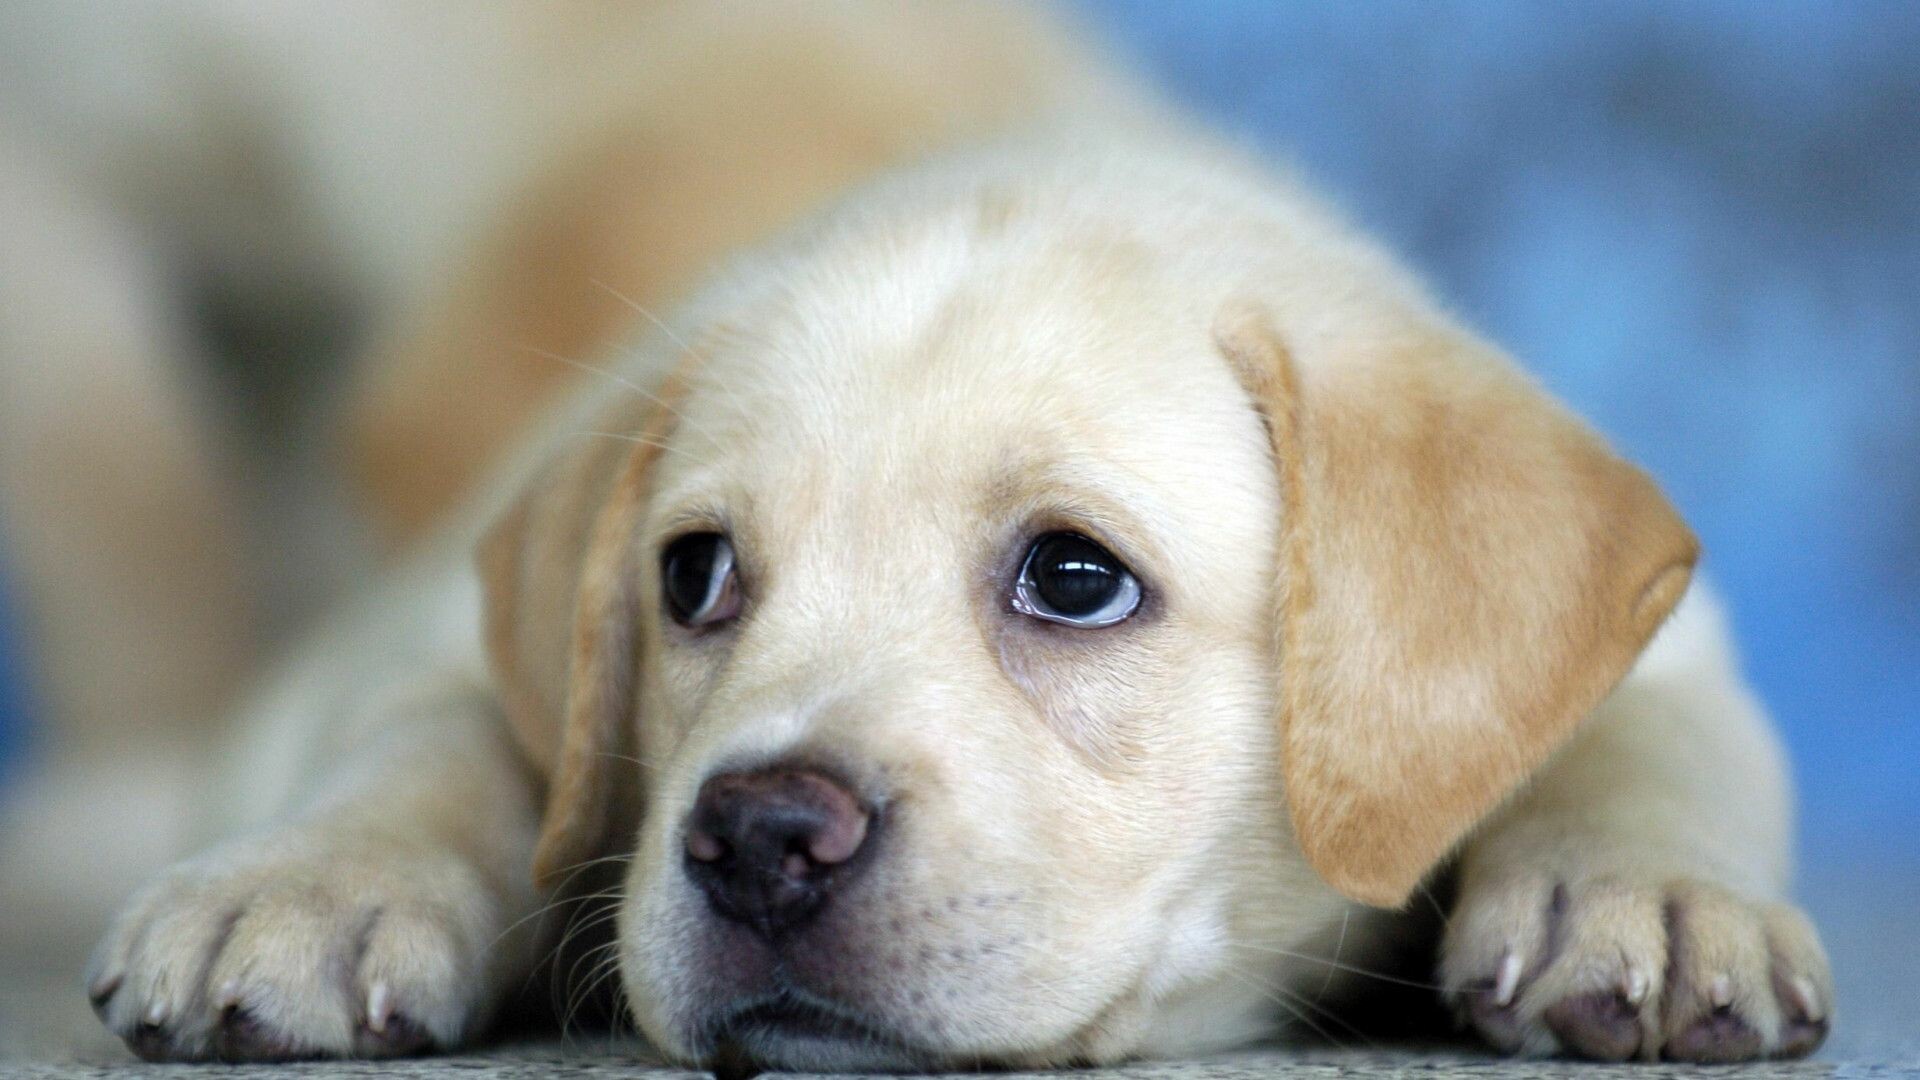 Labrador Retriever: The most popular family dog in America, Puppy. 1920x1080 Full HD Background.